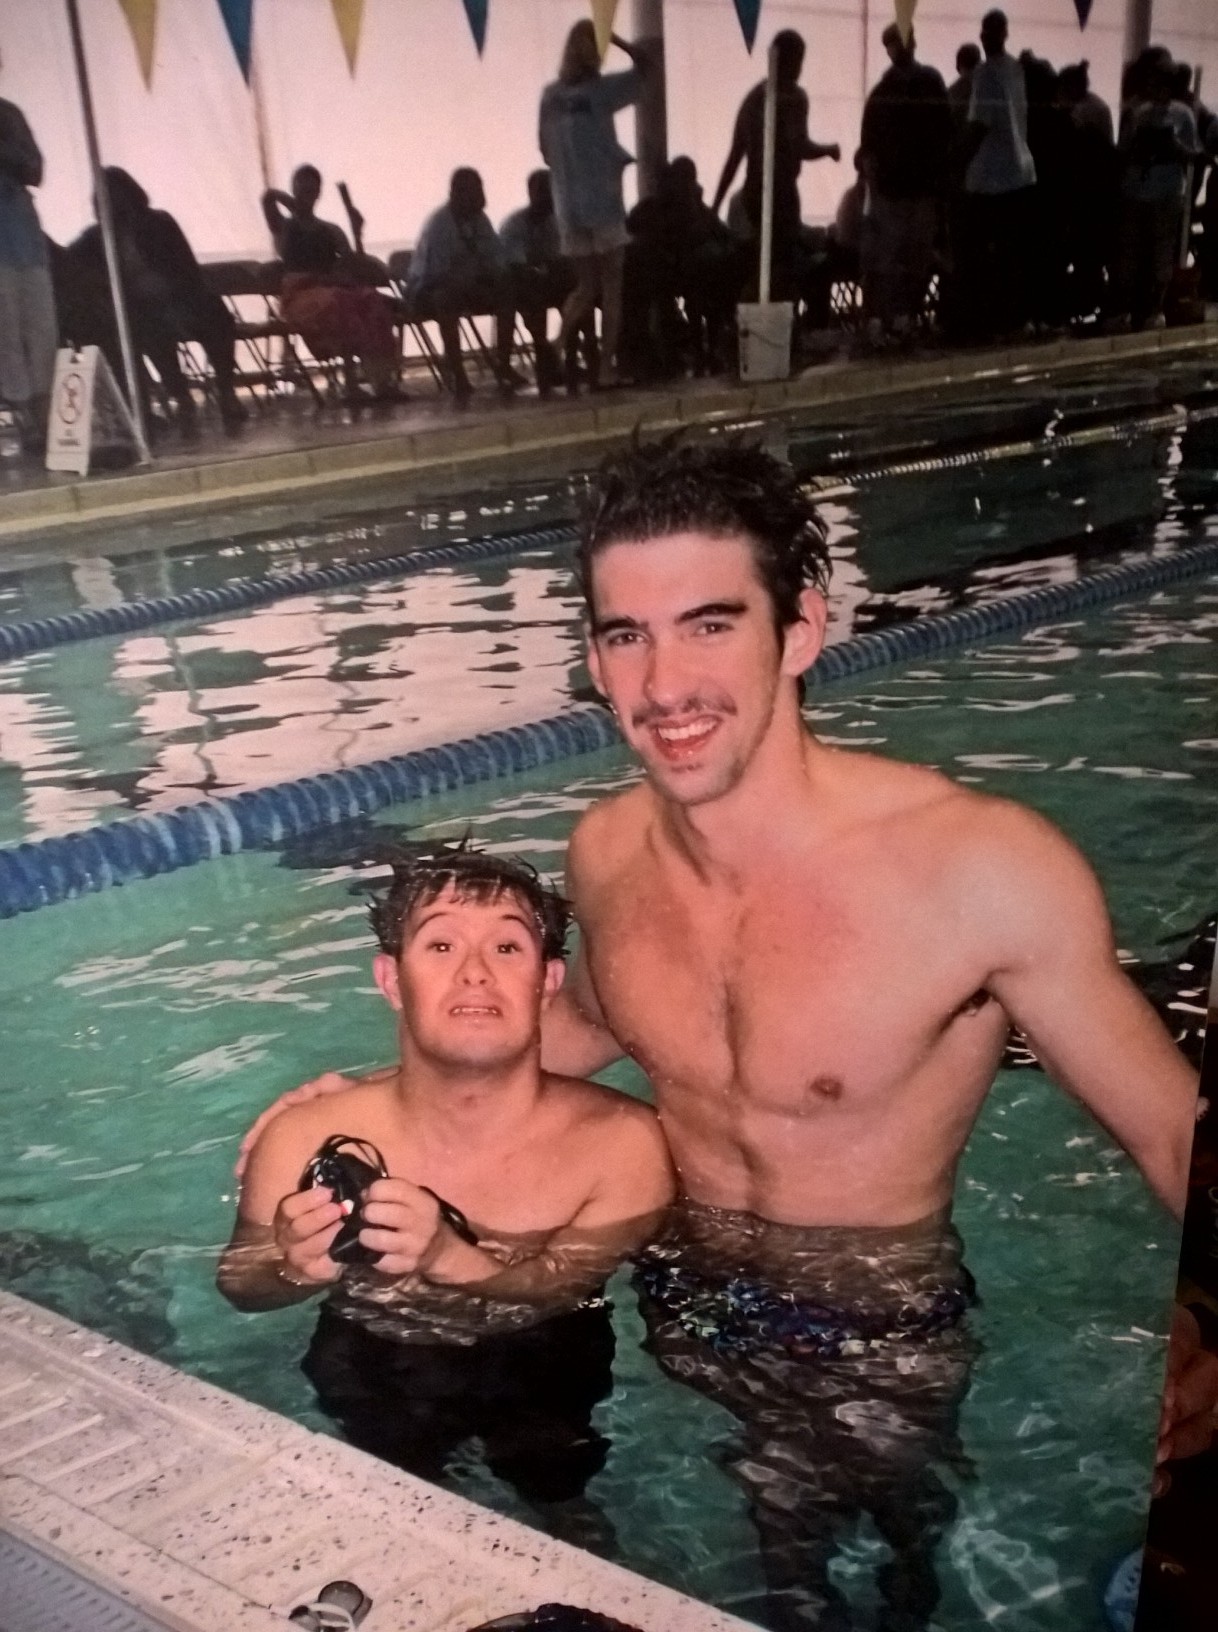 Miyares swimming with Olympic gold medalist Michael Phelps.